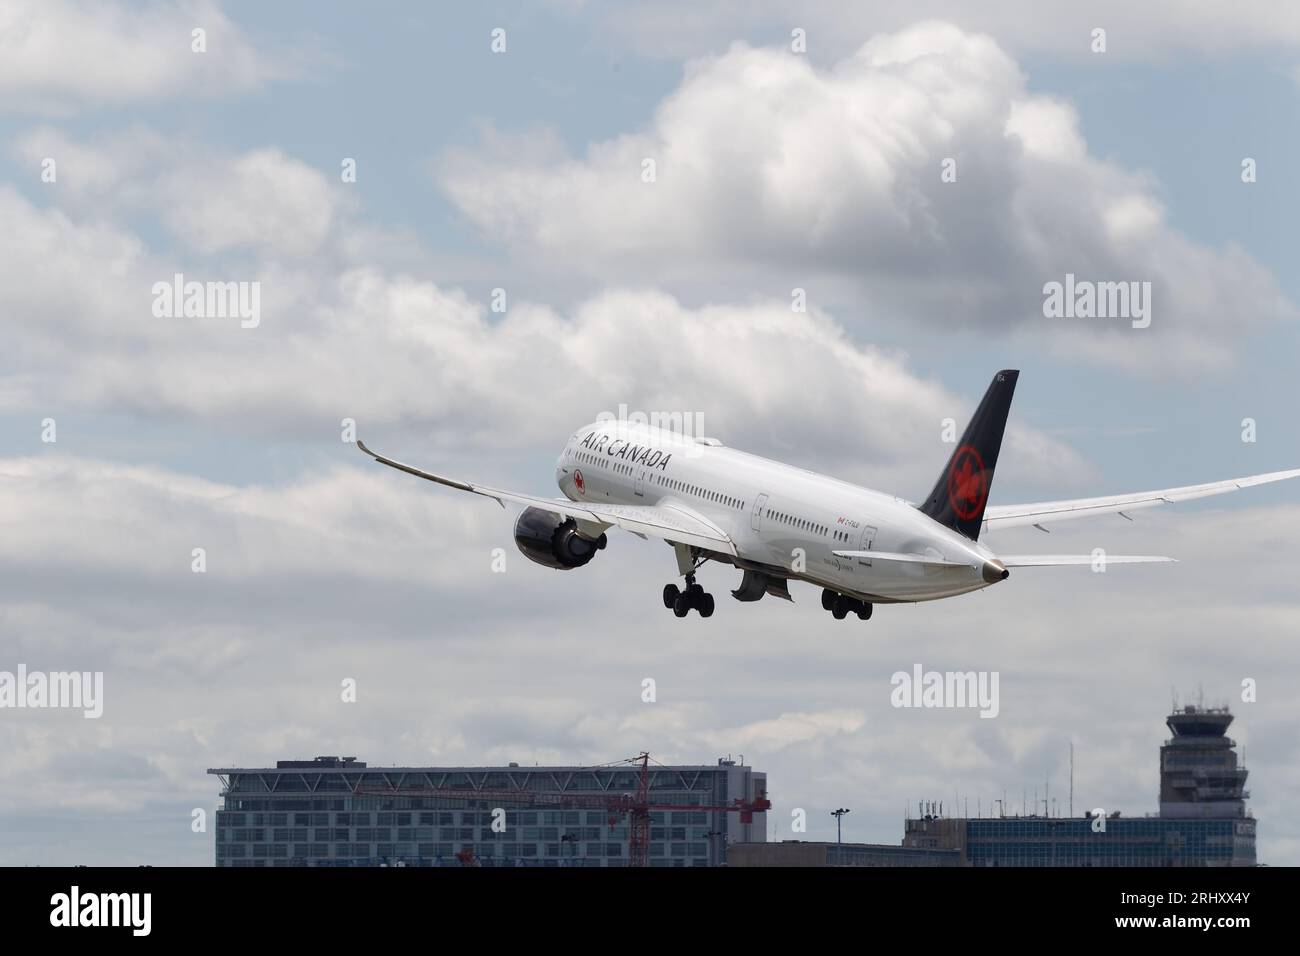 Air Canada's Boeing 787-9 Dreamliner taking off from the Montréal-Pierre Elliott Trudeau International Airport. Dorval, Canada Stock Photo